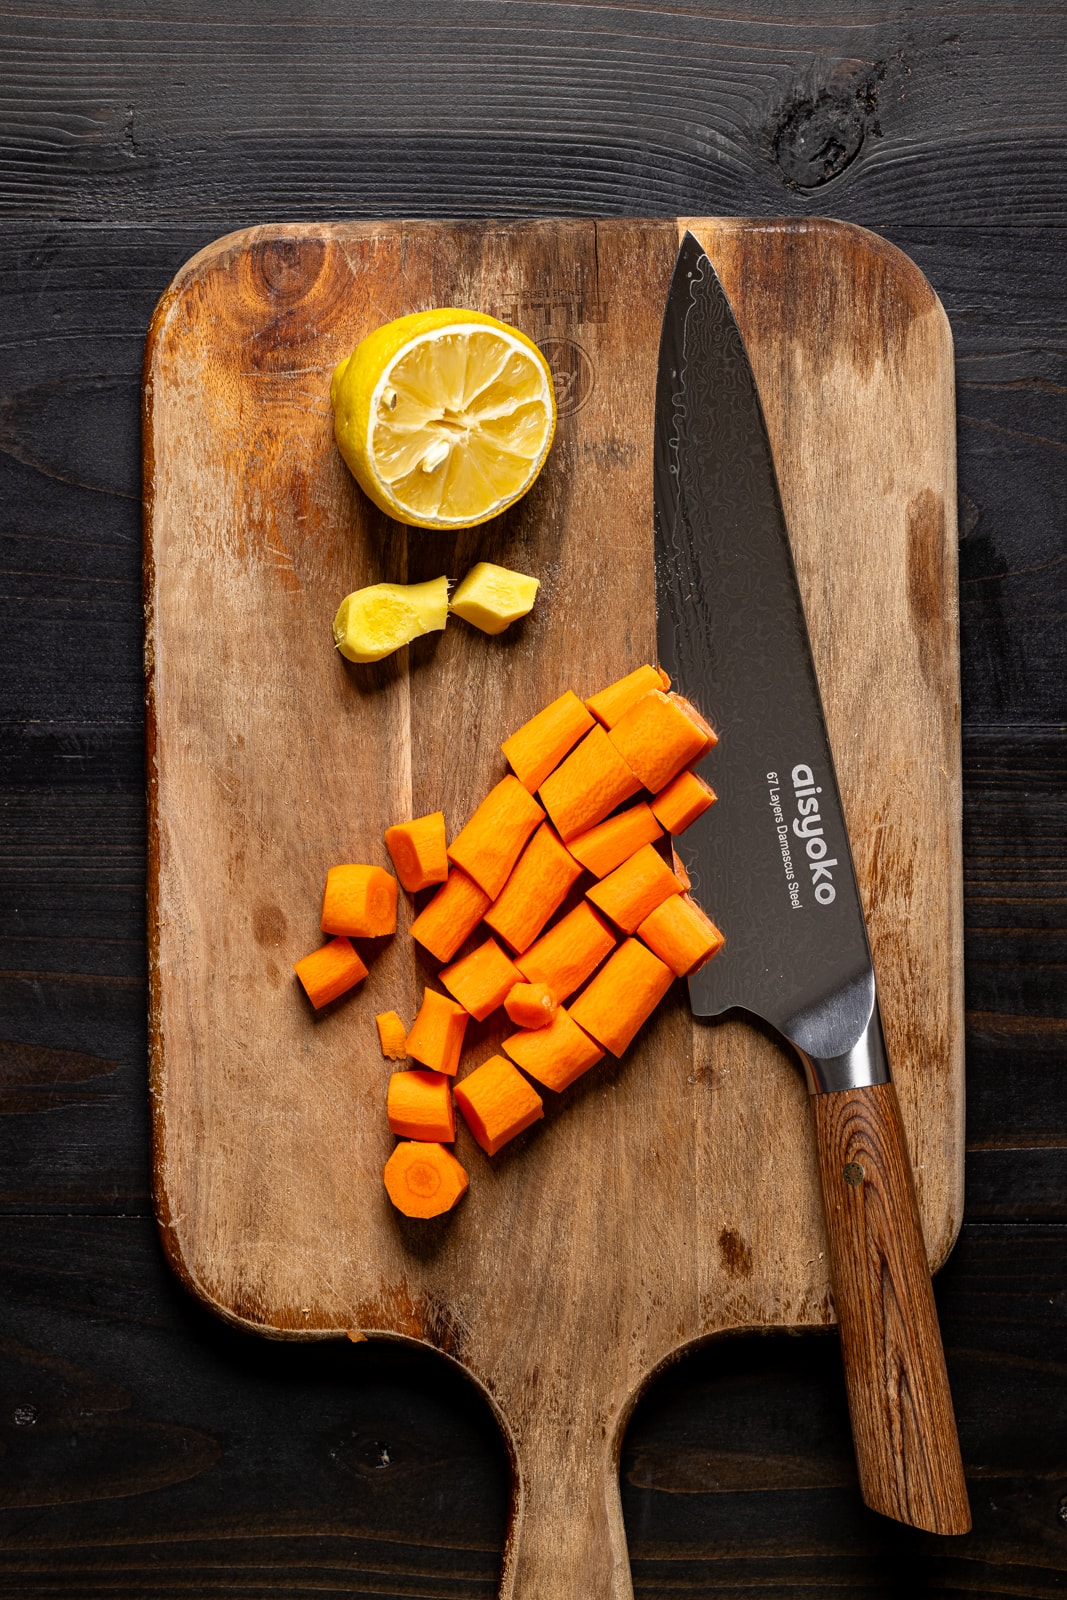 Chopped ingredients on a cutting board with a knife.